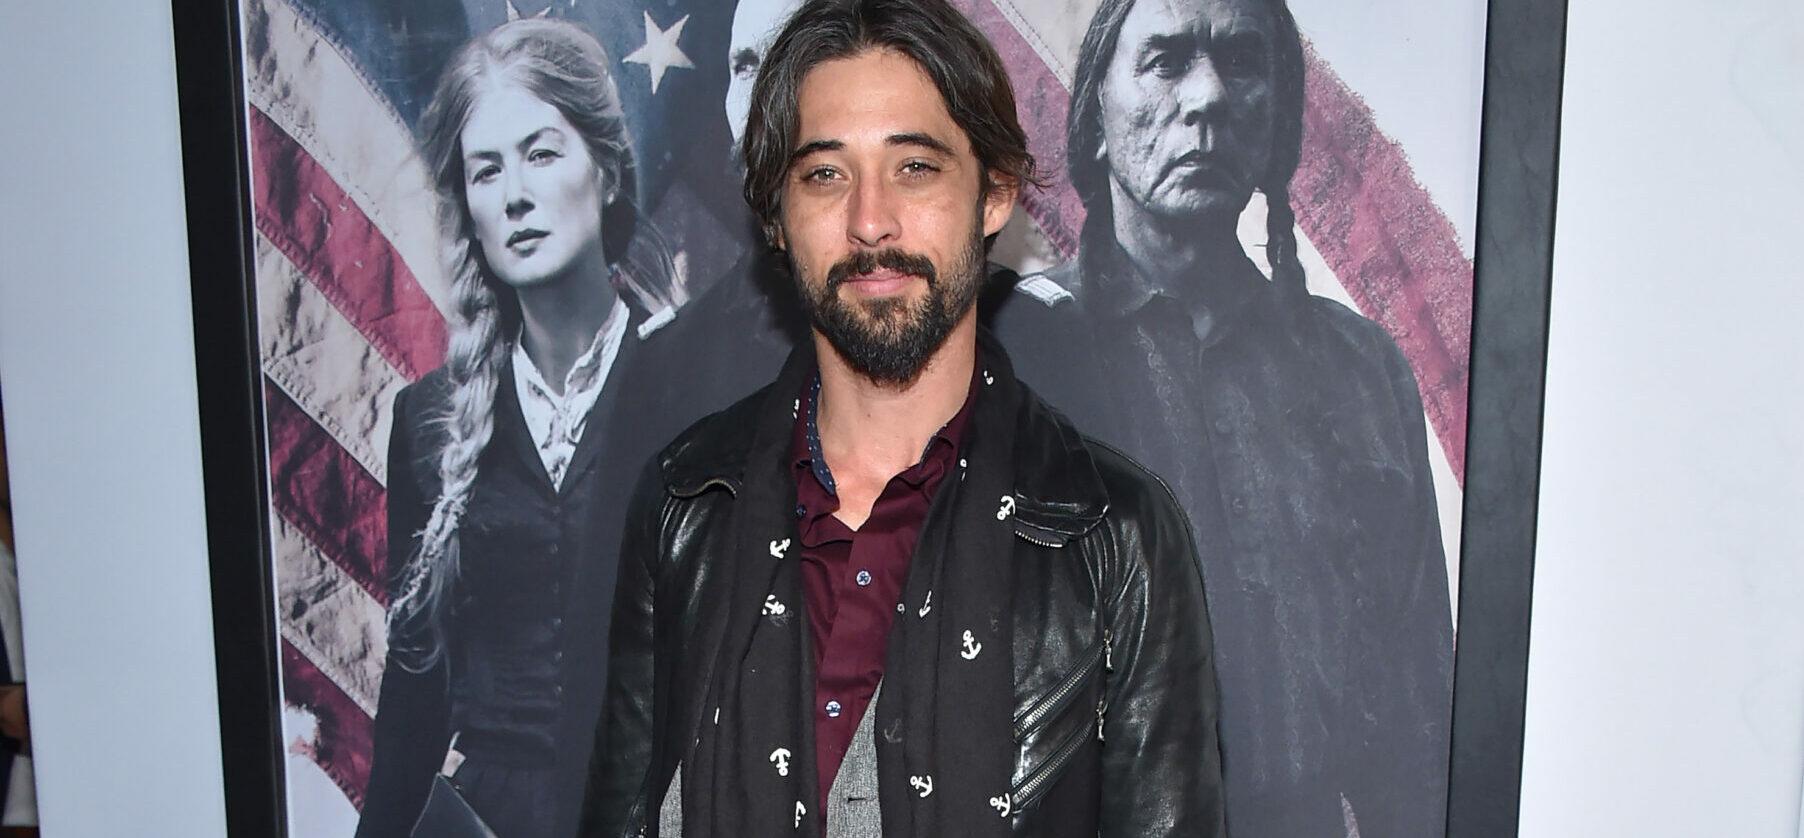 ‘Yellowstone’ Star Ryan Bingham Changing His Name, Removing Connection To Ex-Wife